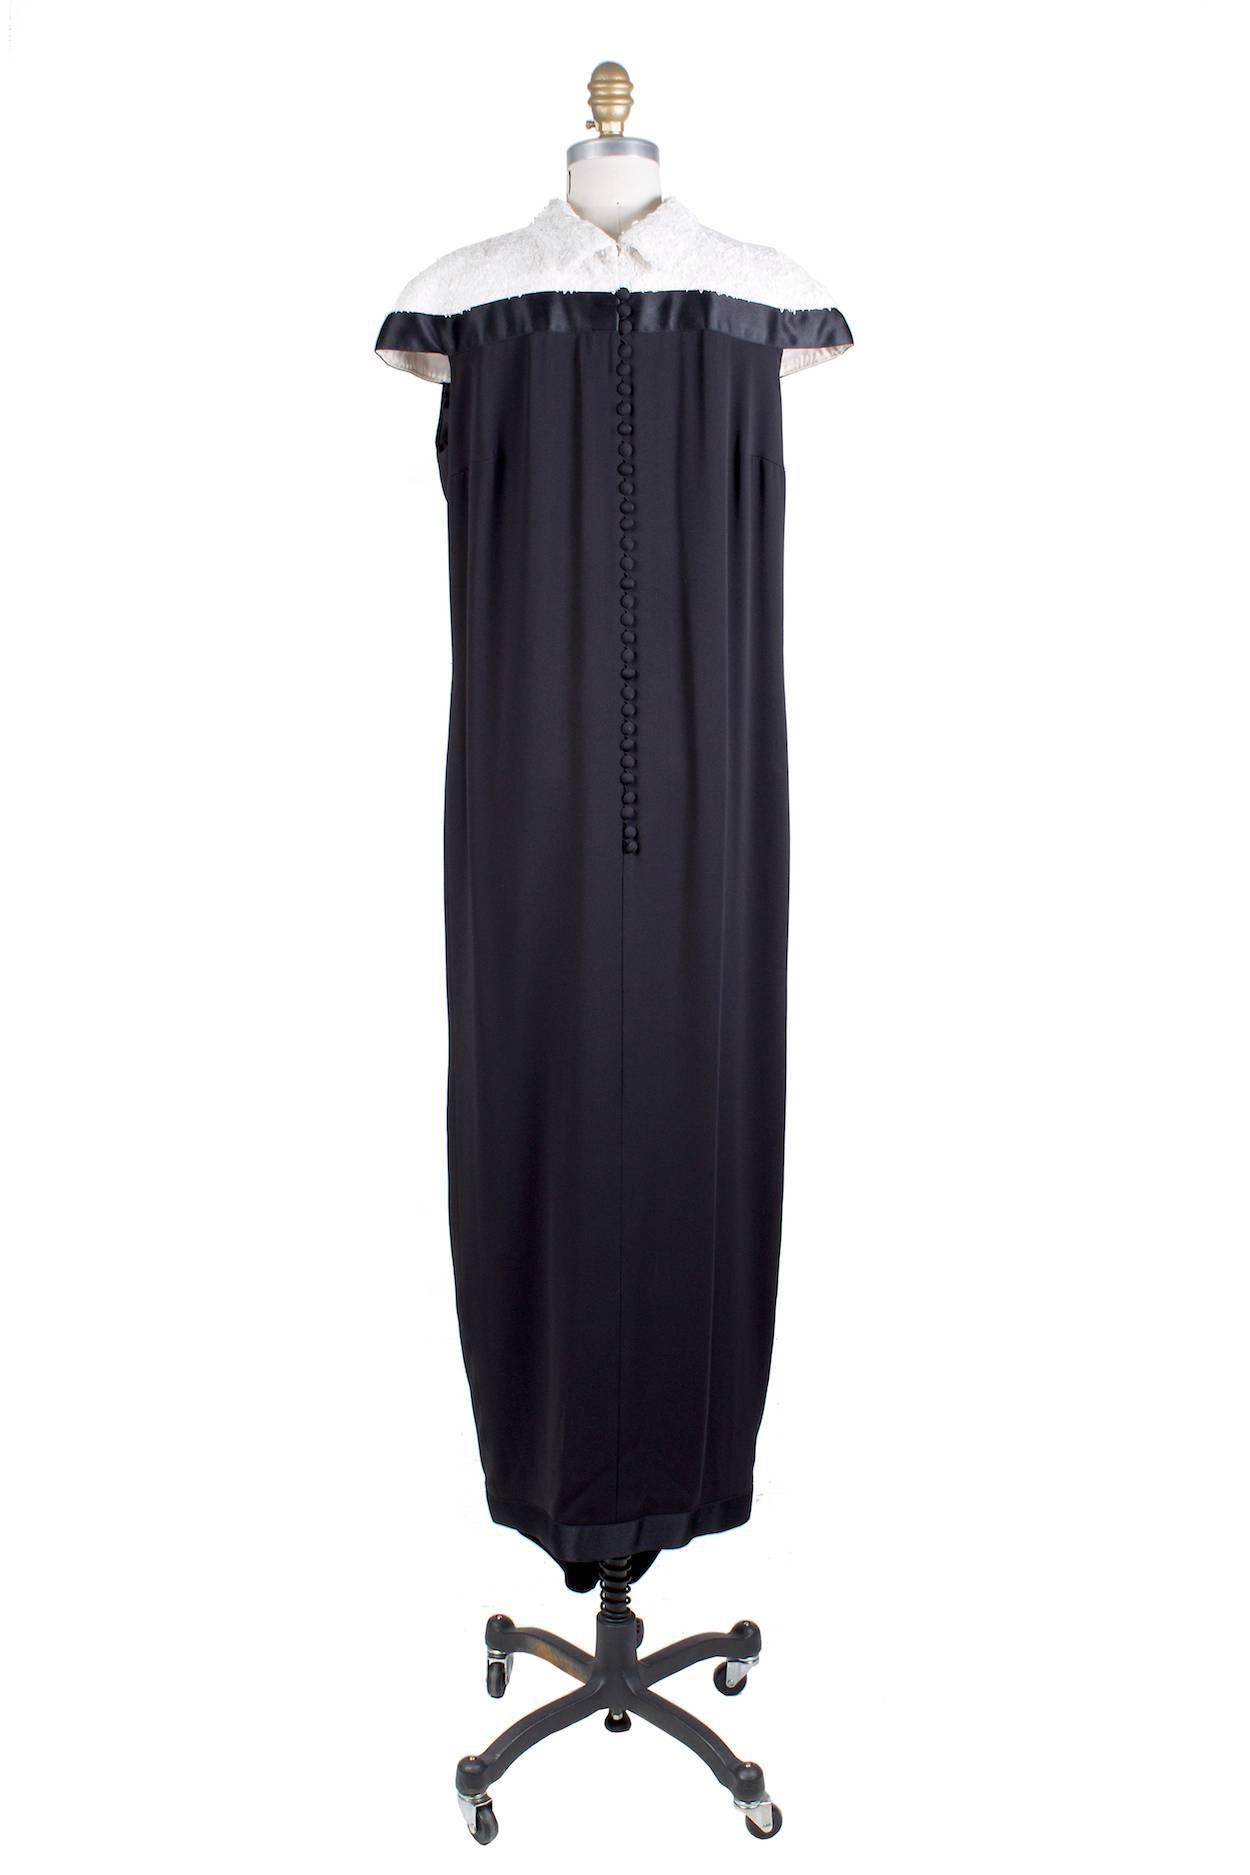 This is a long dress by Chanel.  It features an embellished collar consisting of tiny leaf shaped sequins.  There are silk covered buttons down the back and a slit in front that also closes with silk covered buttons.  The skirt also has a crepe